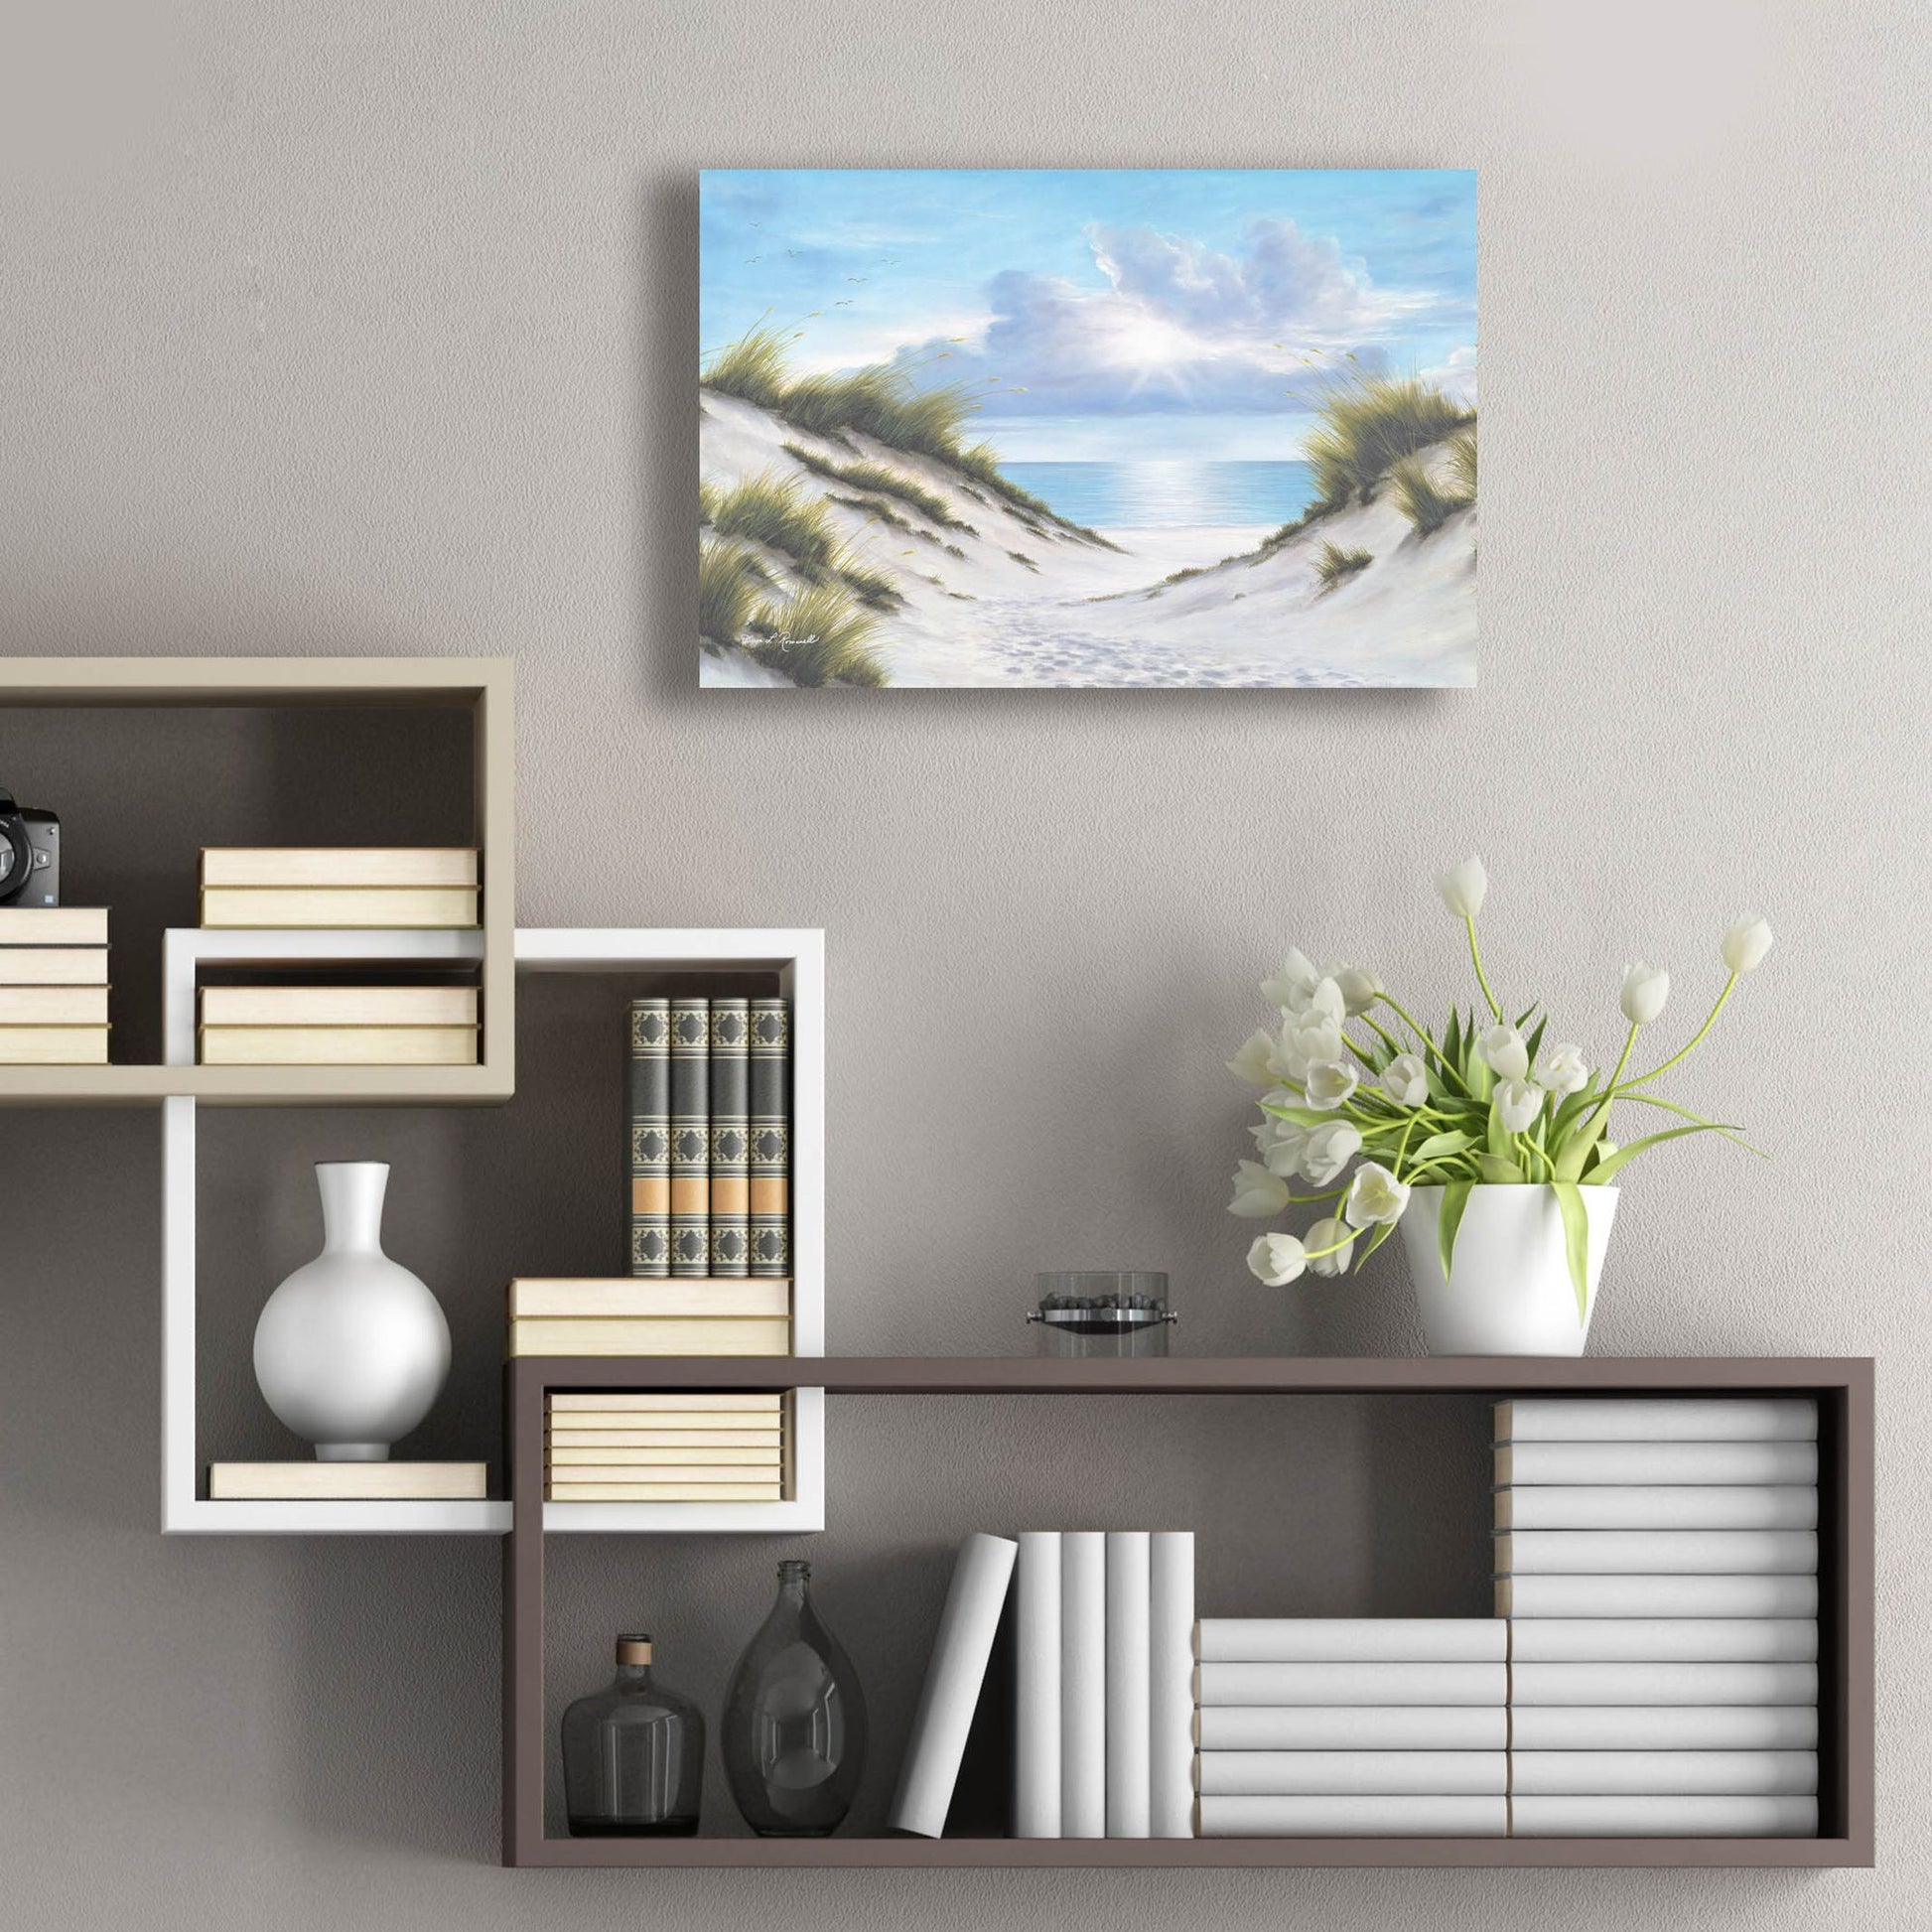 Epic Art ' Sand and Sea' by Diane Romanello, Acrylic Glass Wall Art,24x16